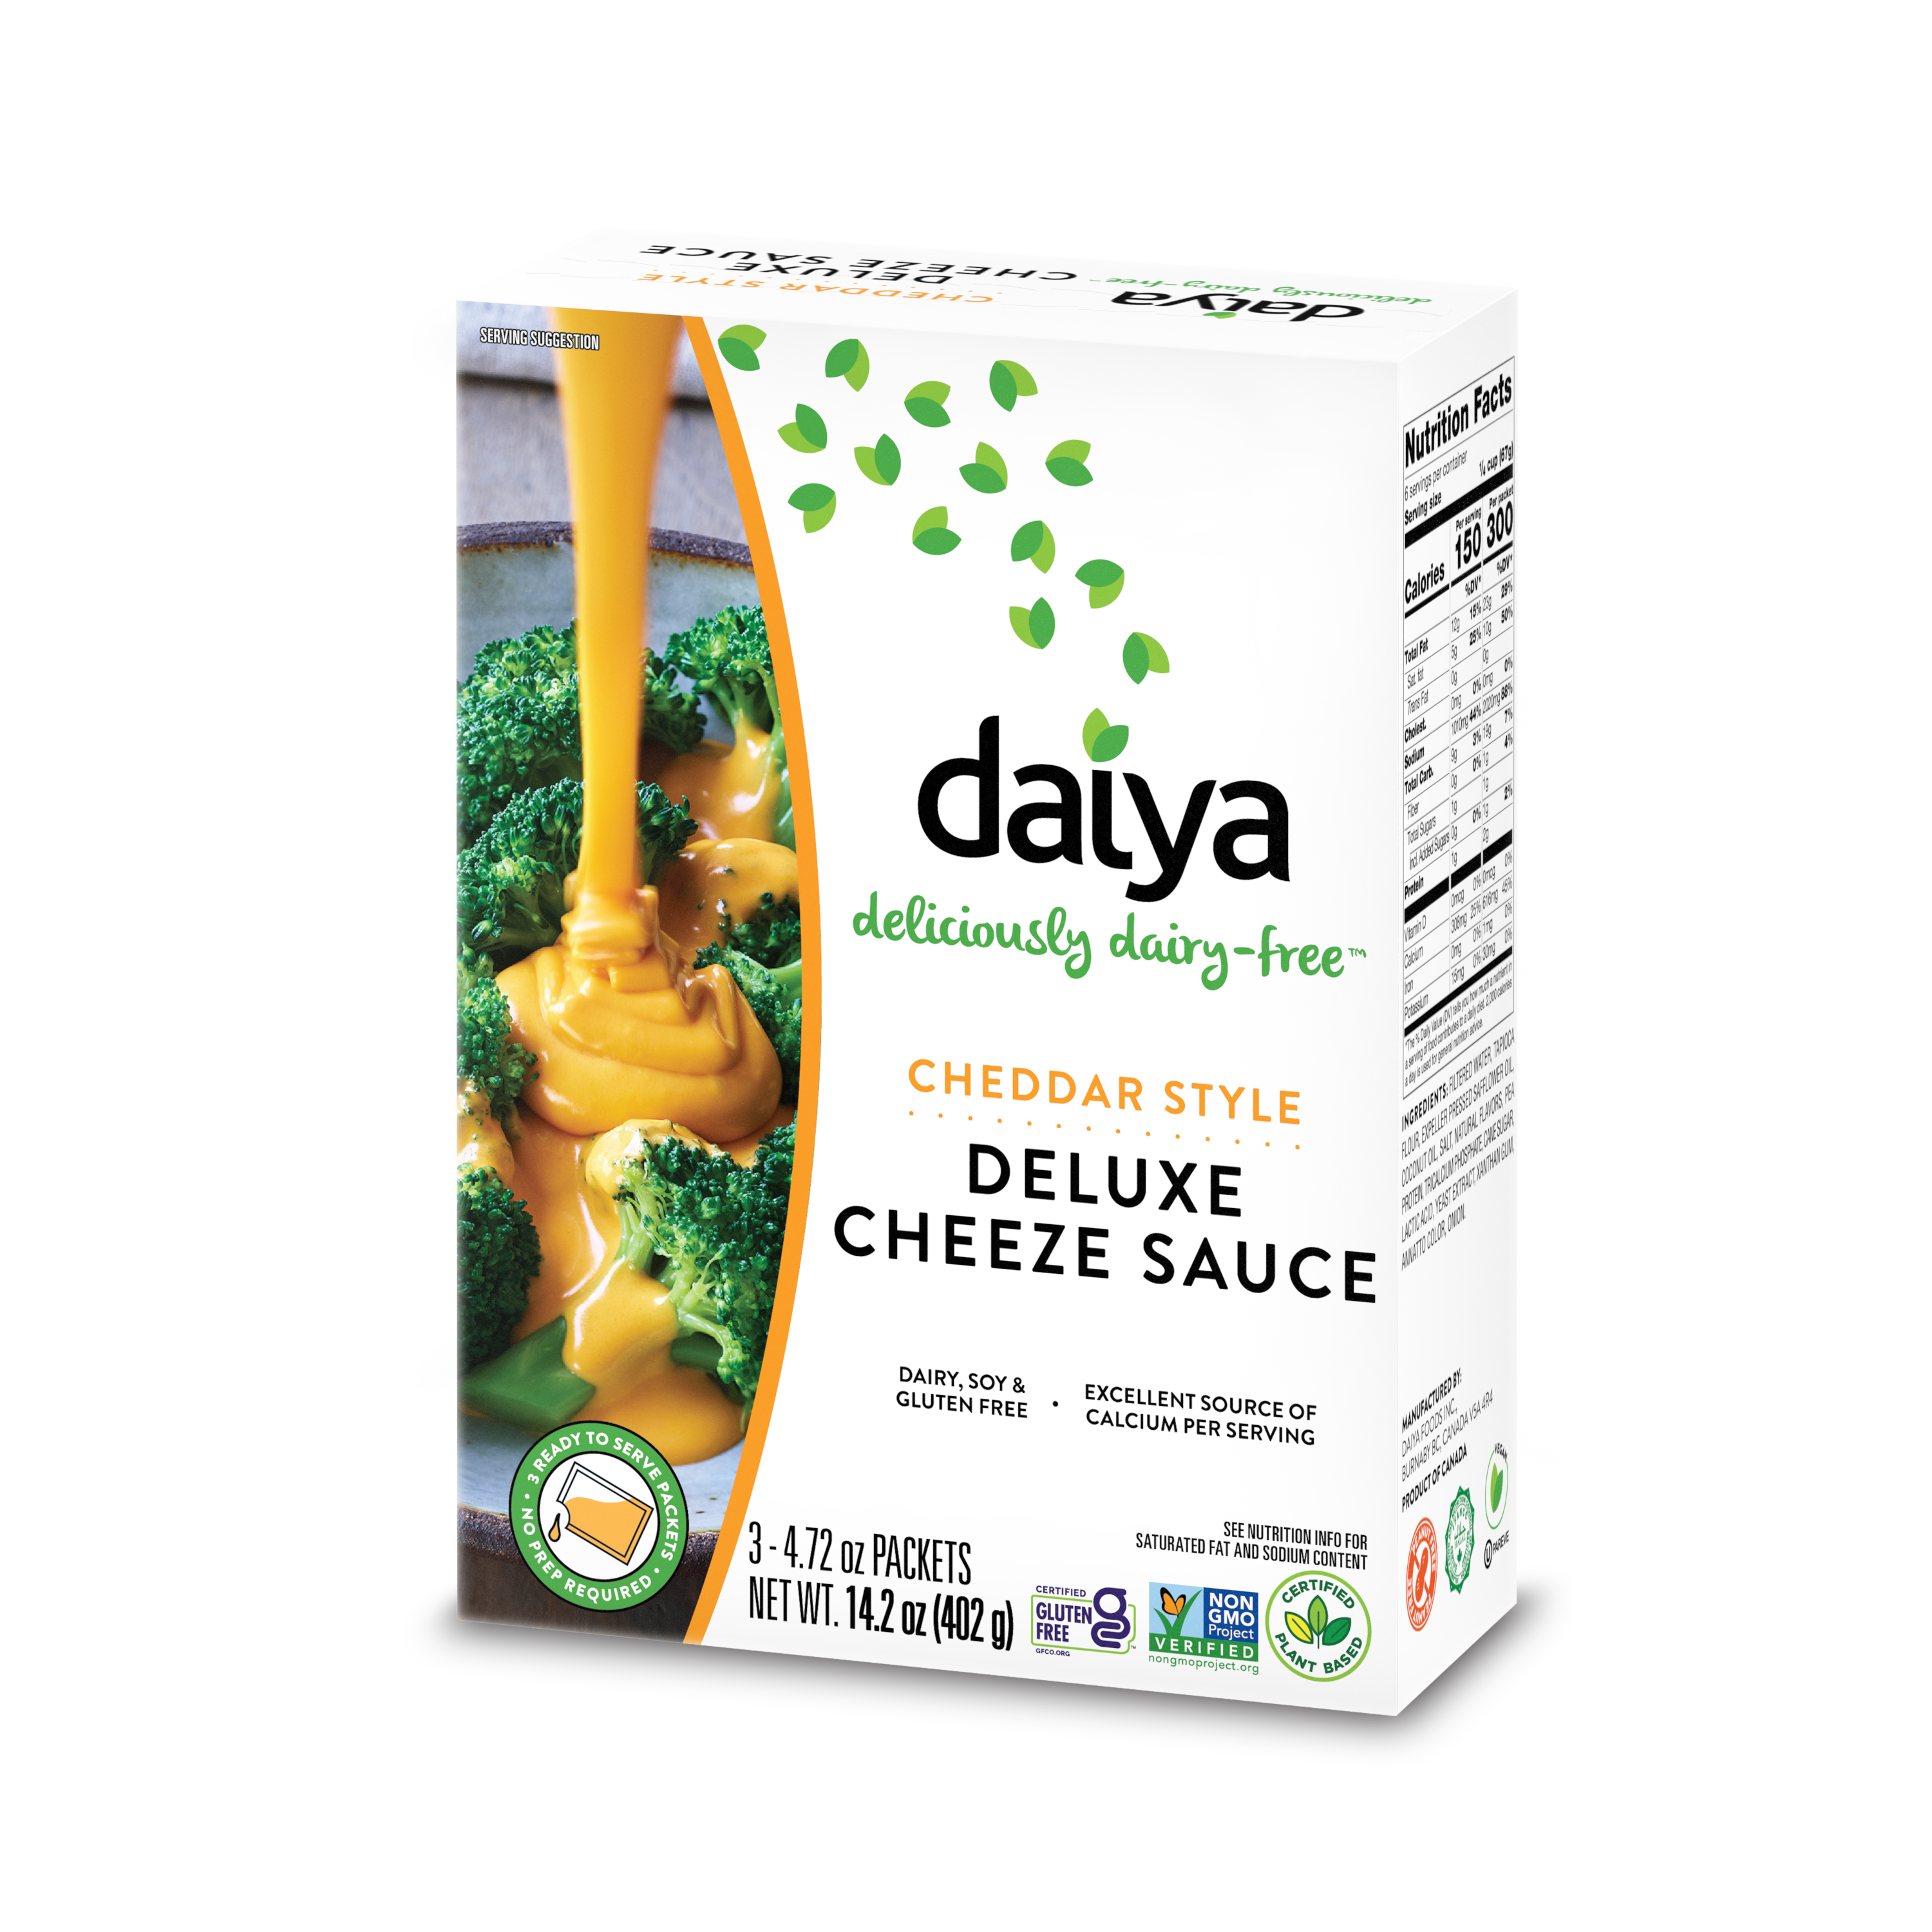 Daiya Foods Cheddar Style Deluxe Cheeze Sauce 8 units per case 403 g